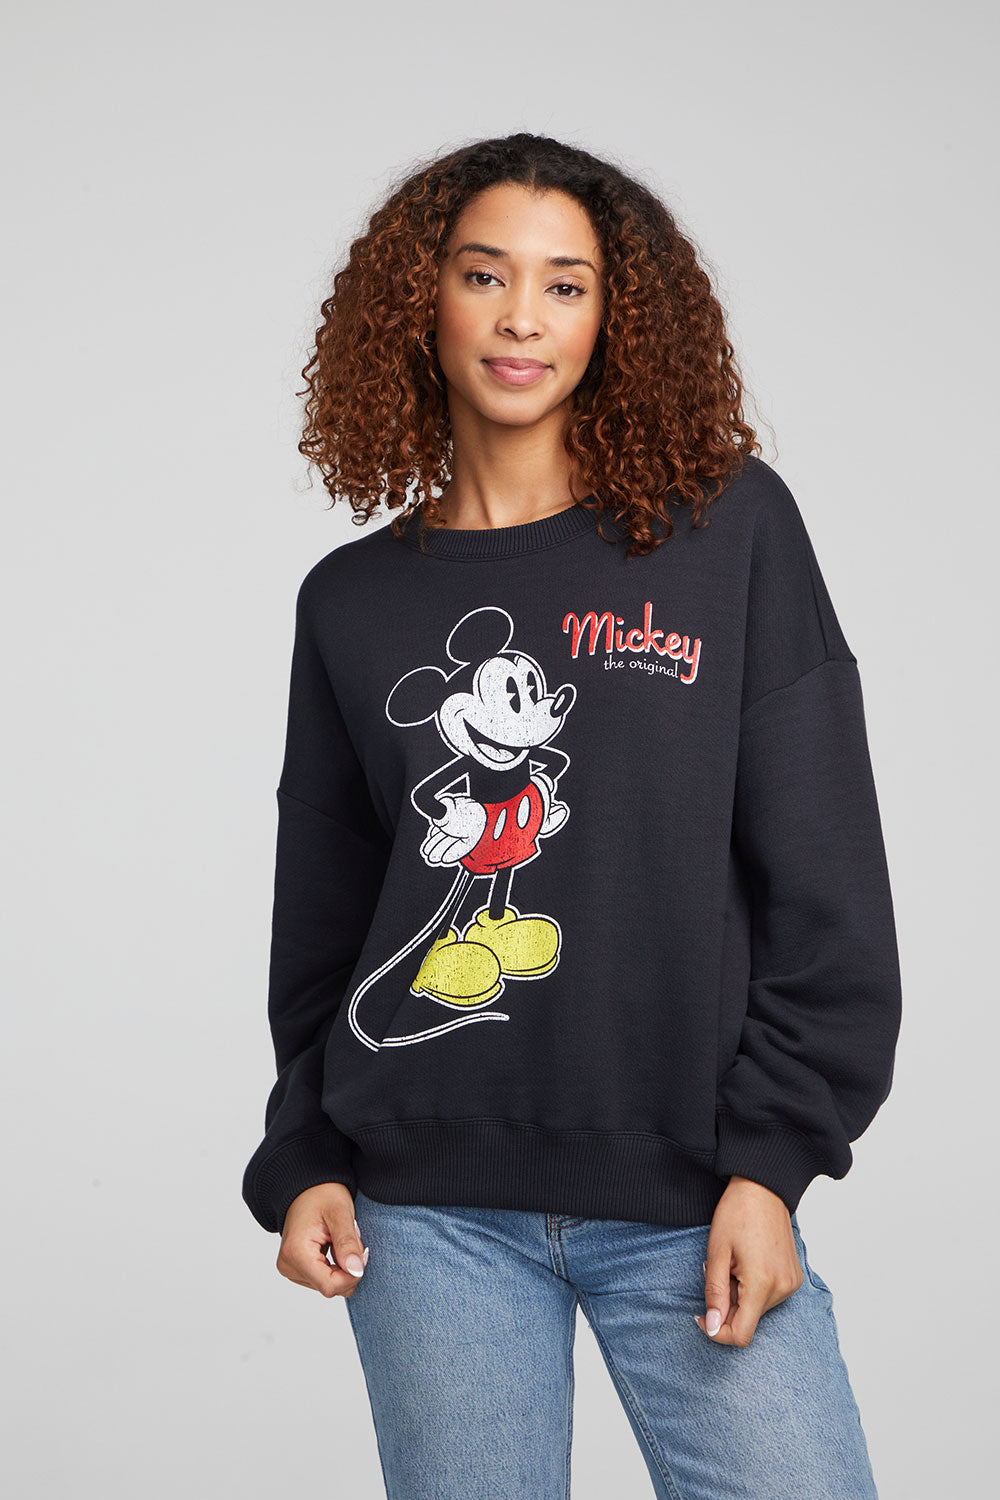 Mickey Mouse The Original - Chaser Brand